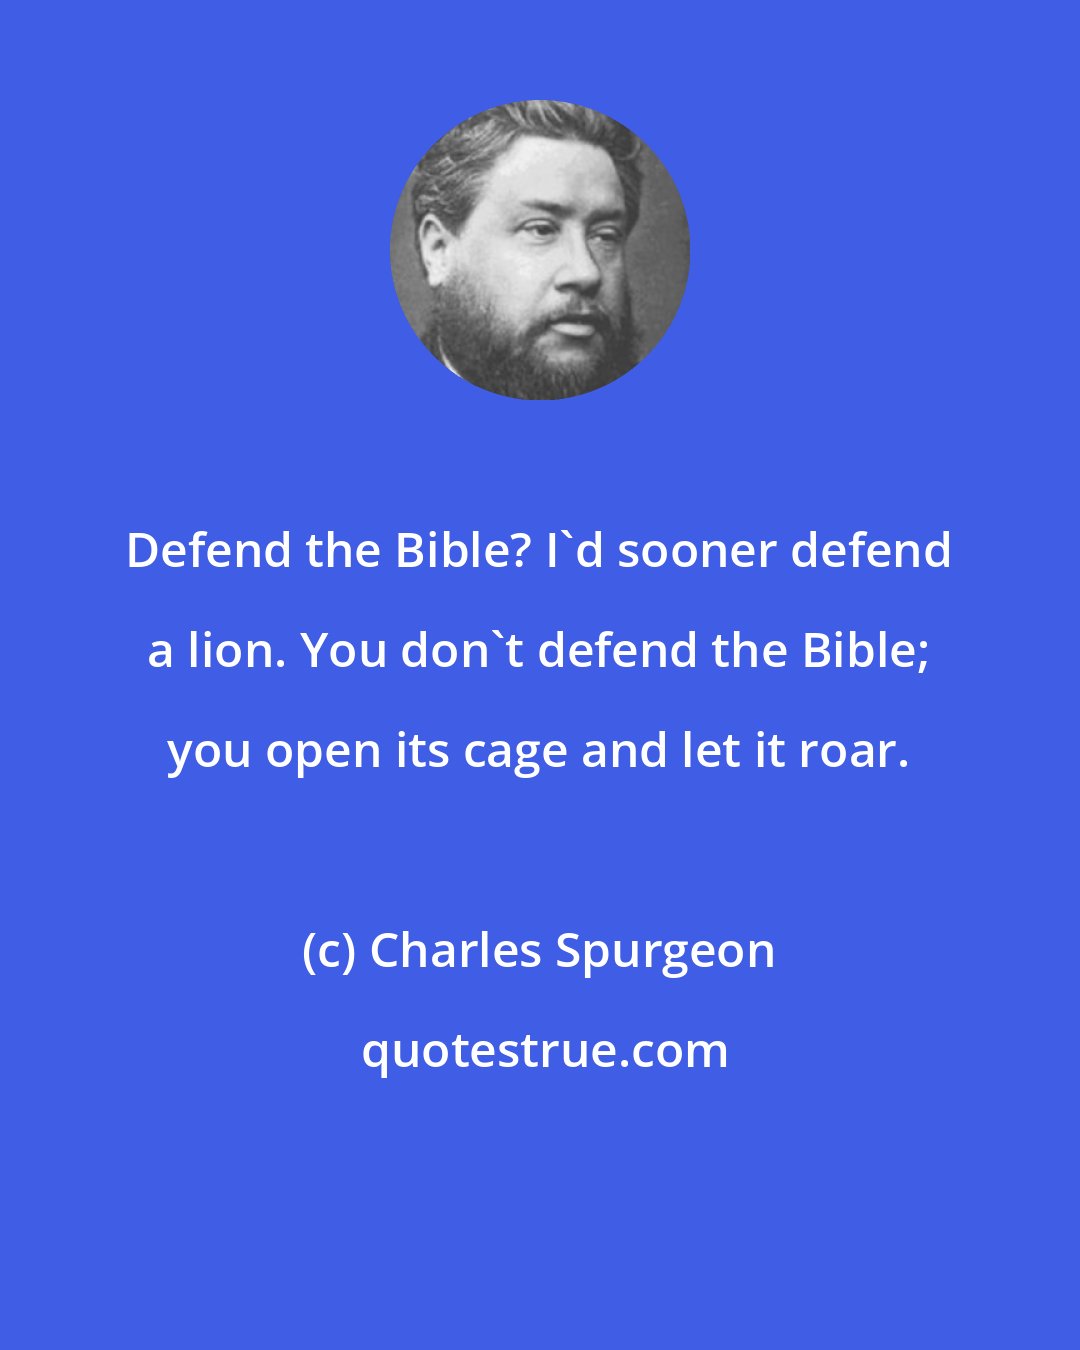 Charles Spurgeon: Defend the Bible? I'd sooner defend a lion. You don't defend the Bible; you open its cage and let it roar.